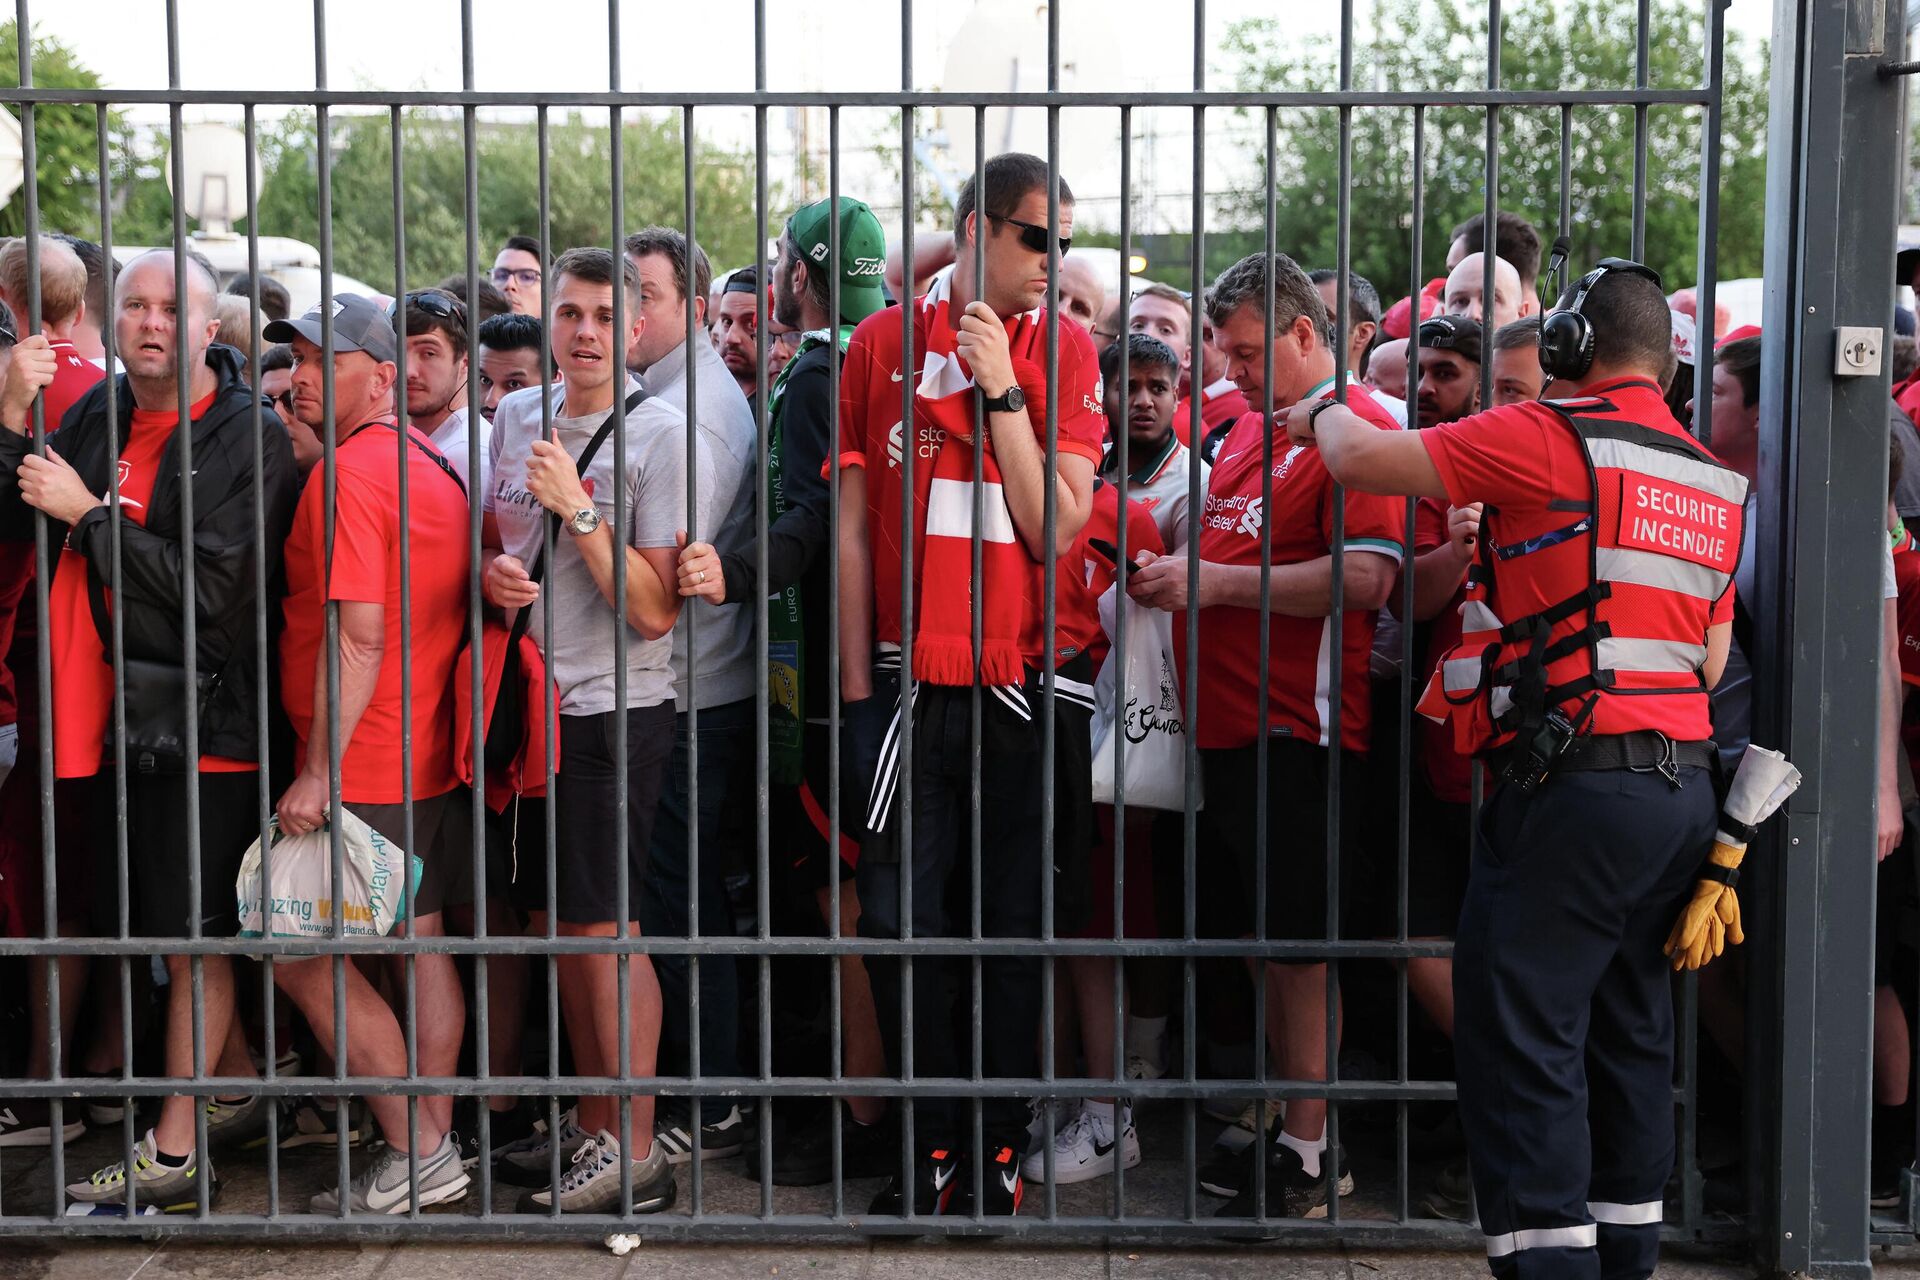 Liverpool fans stand outside unable to get in in time leading to the match being delayed prior to the UEFA Champions League final football match between Liverpool and Real Madrid at the Stade de France in Saint-Denis, north of Paris, on May 28, 2022 - Sputnik International, 1920, 28.05.2022